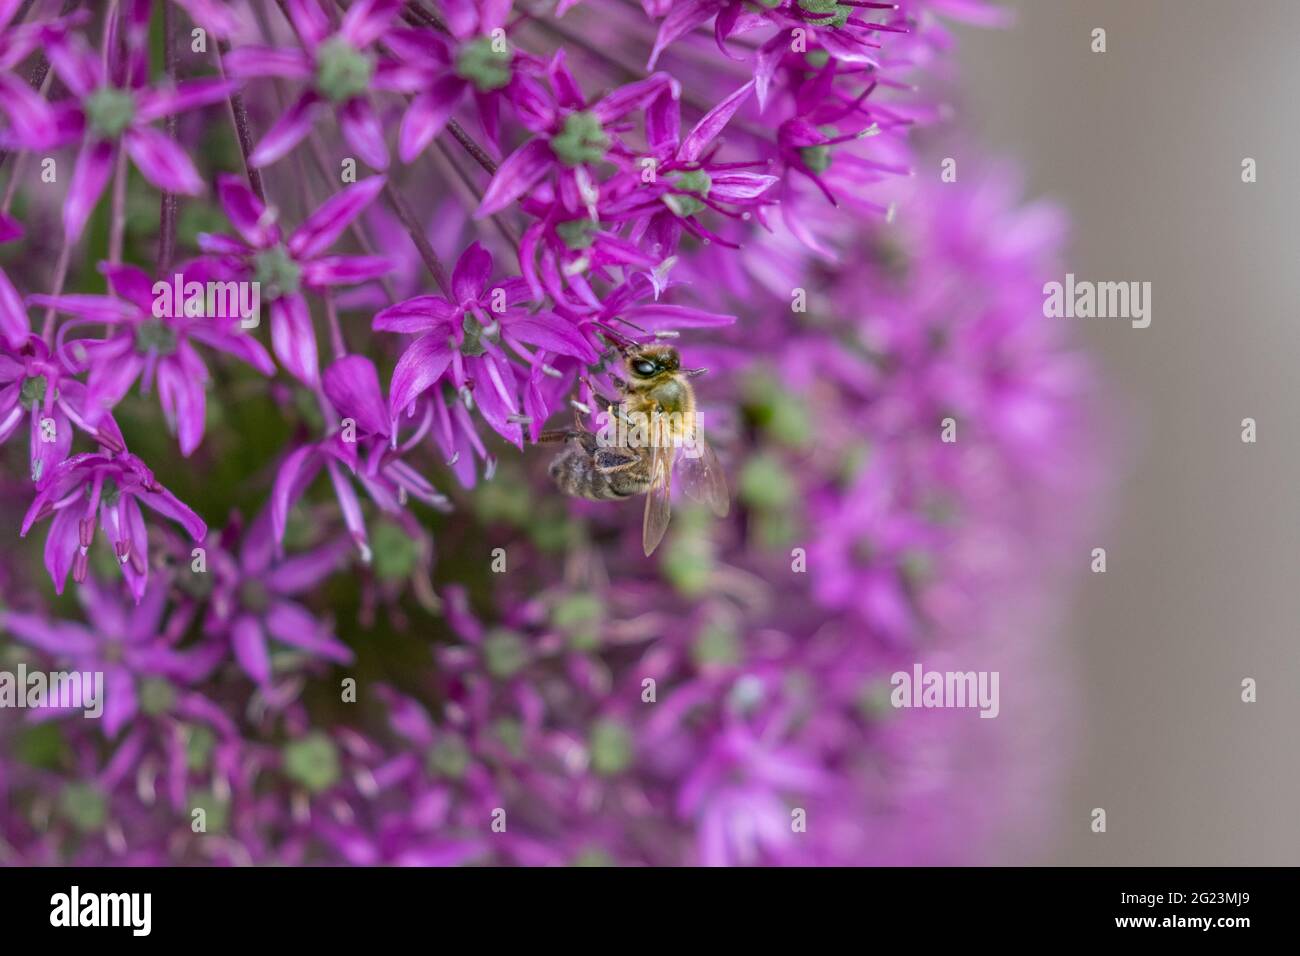 A honey bee collecting pollen from an allium (ornamental onion) flower. Stock Photo